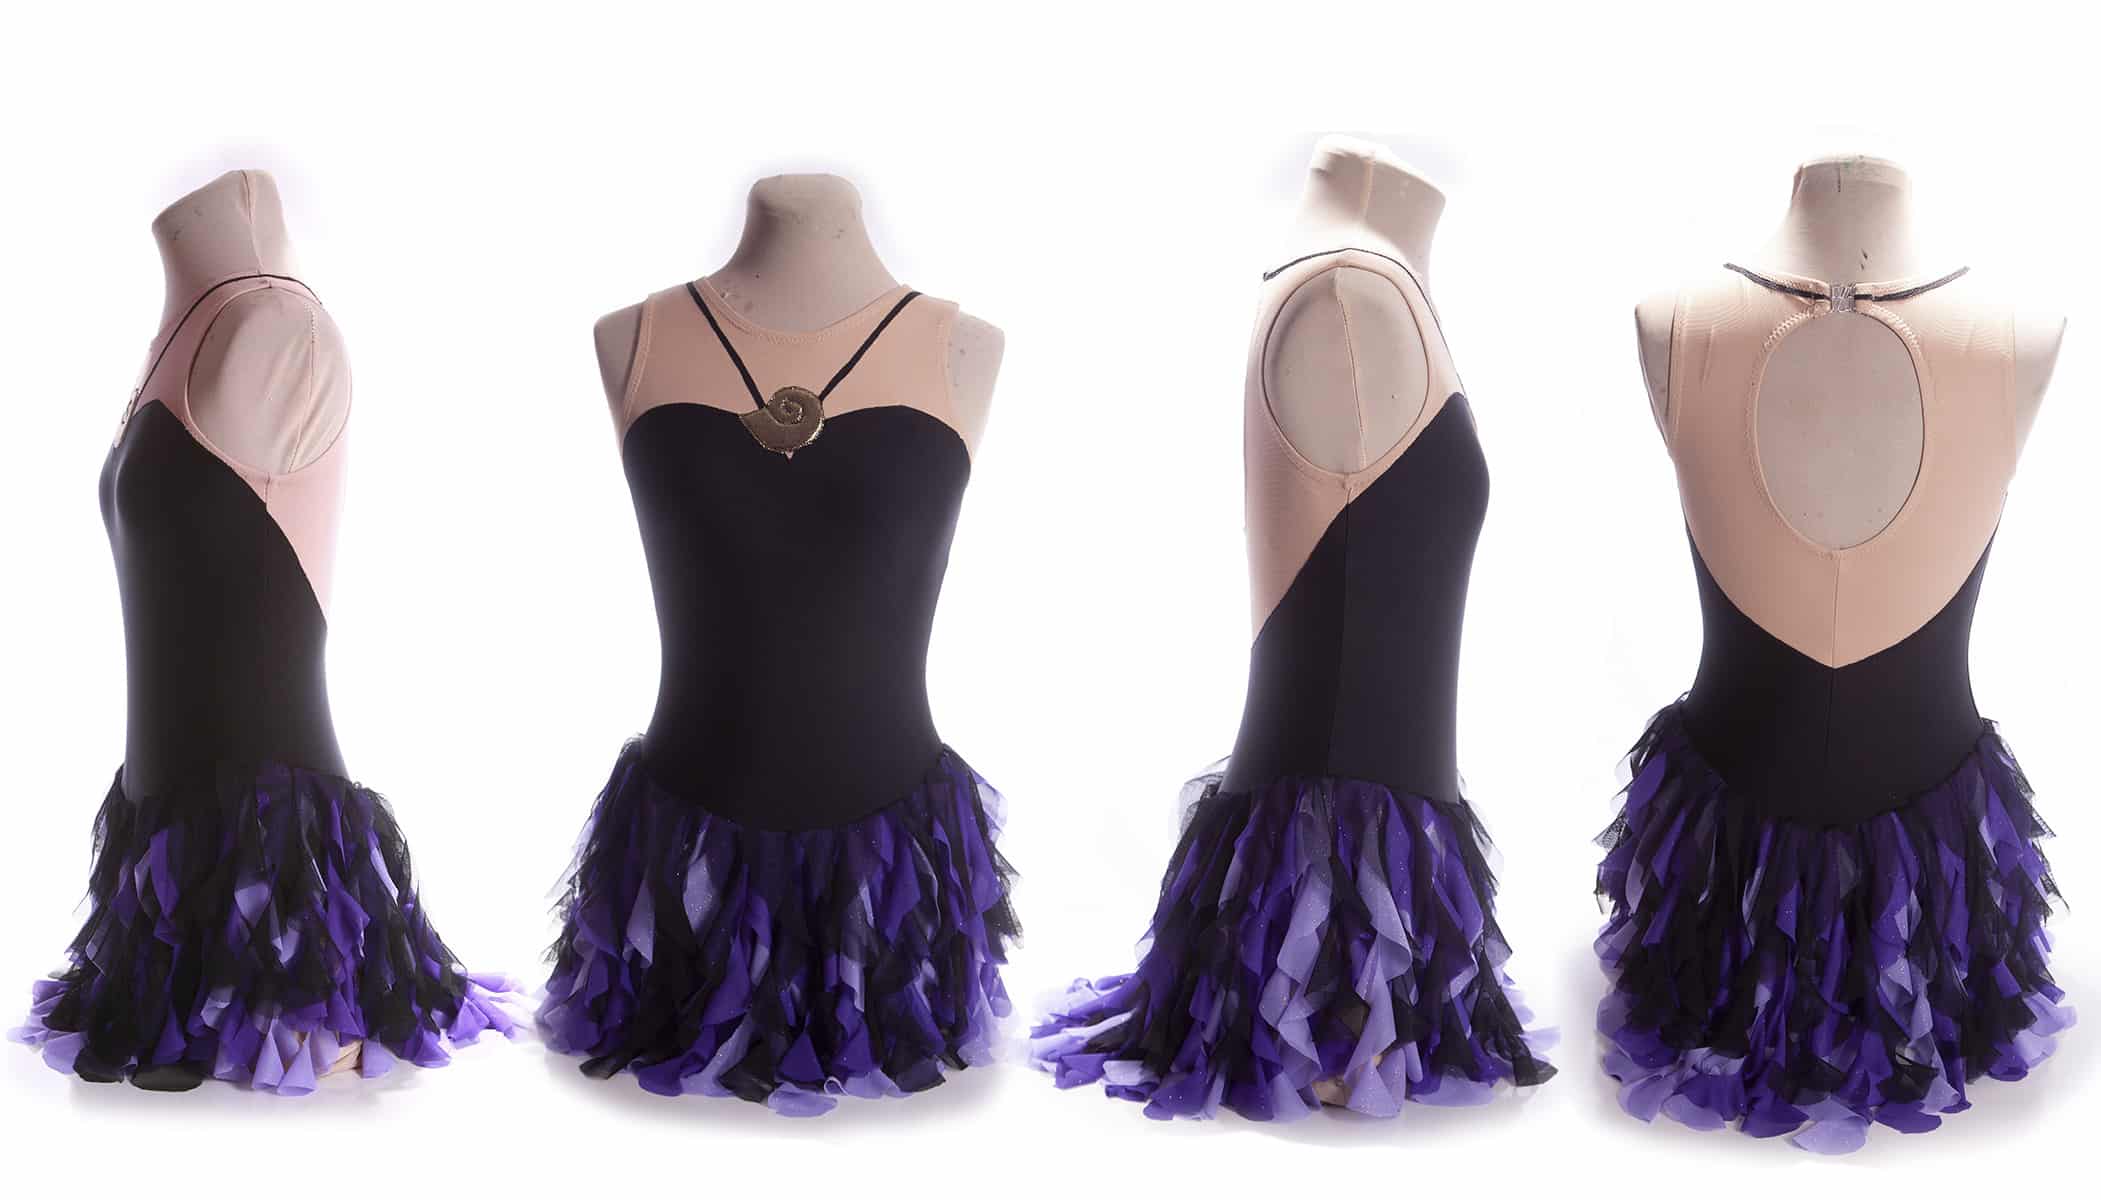 Fron, back, and side views of a figure skating dress made to look like Ursula from the Little Mermaid.